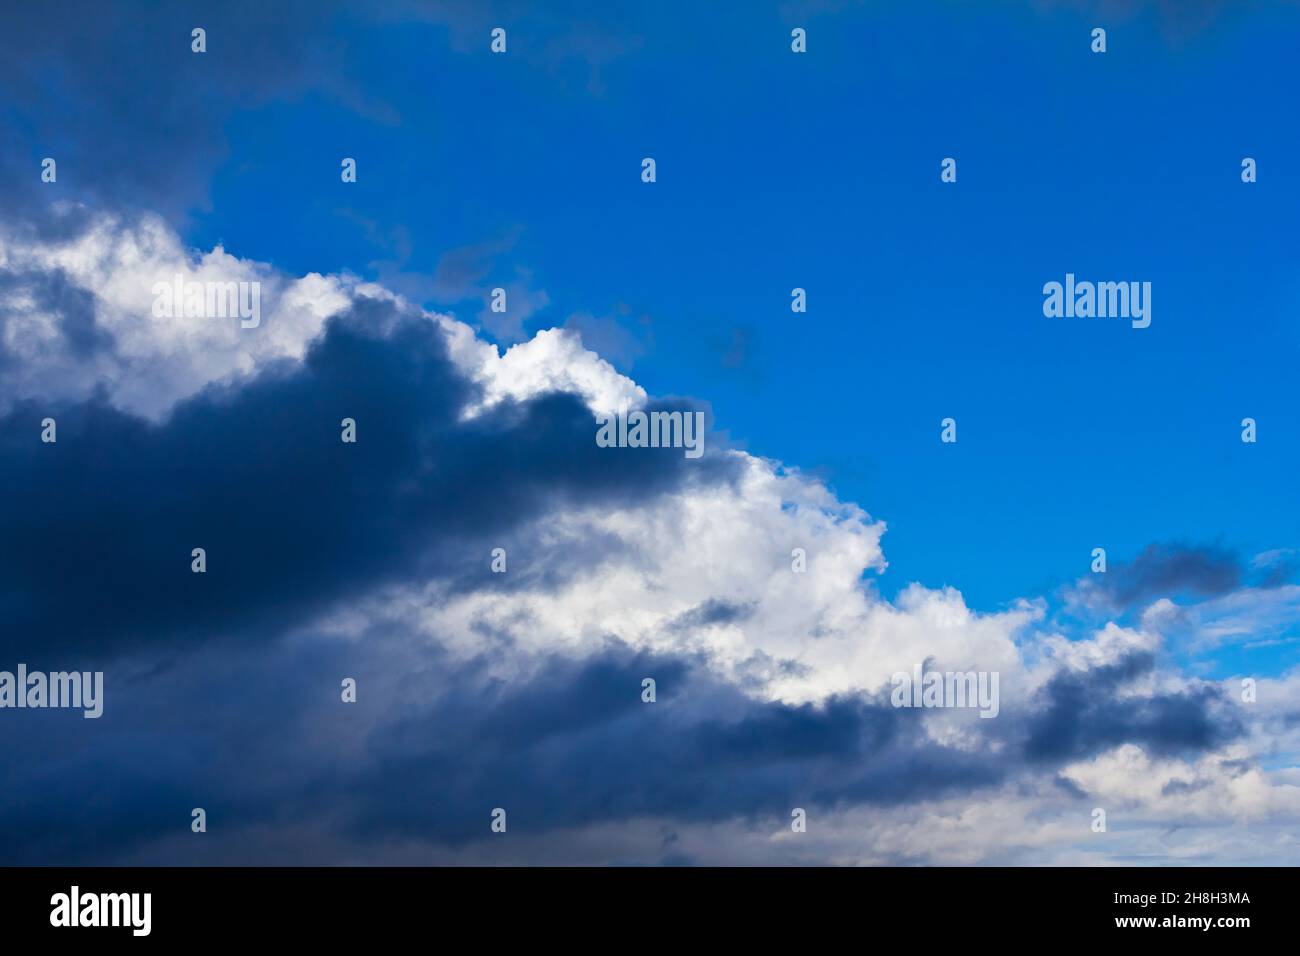 Dramatic light and dark clouds against a blue summer sky. Dangerous atmosphere concept background texture. Stock Photo